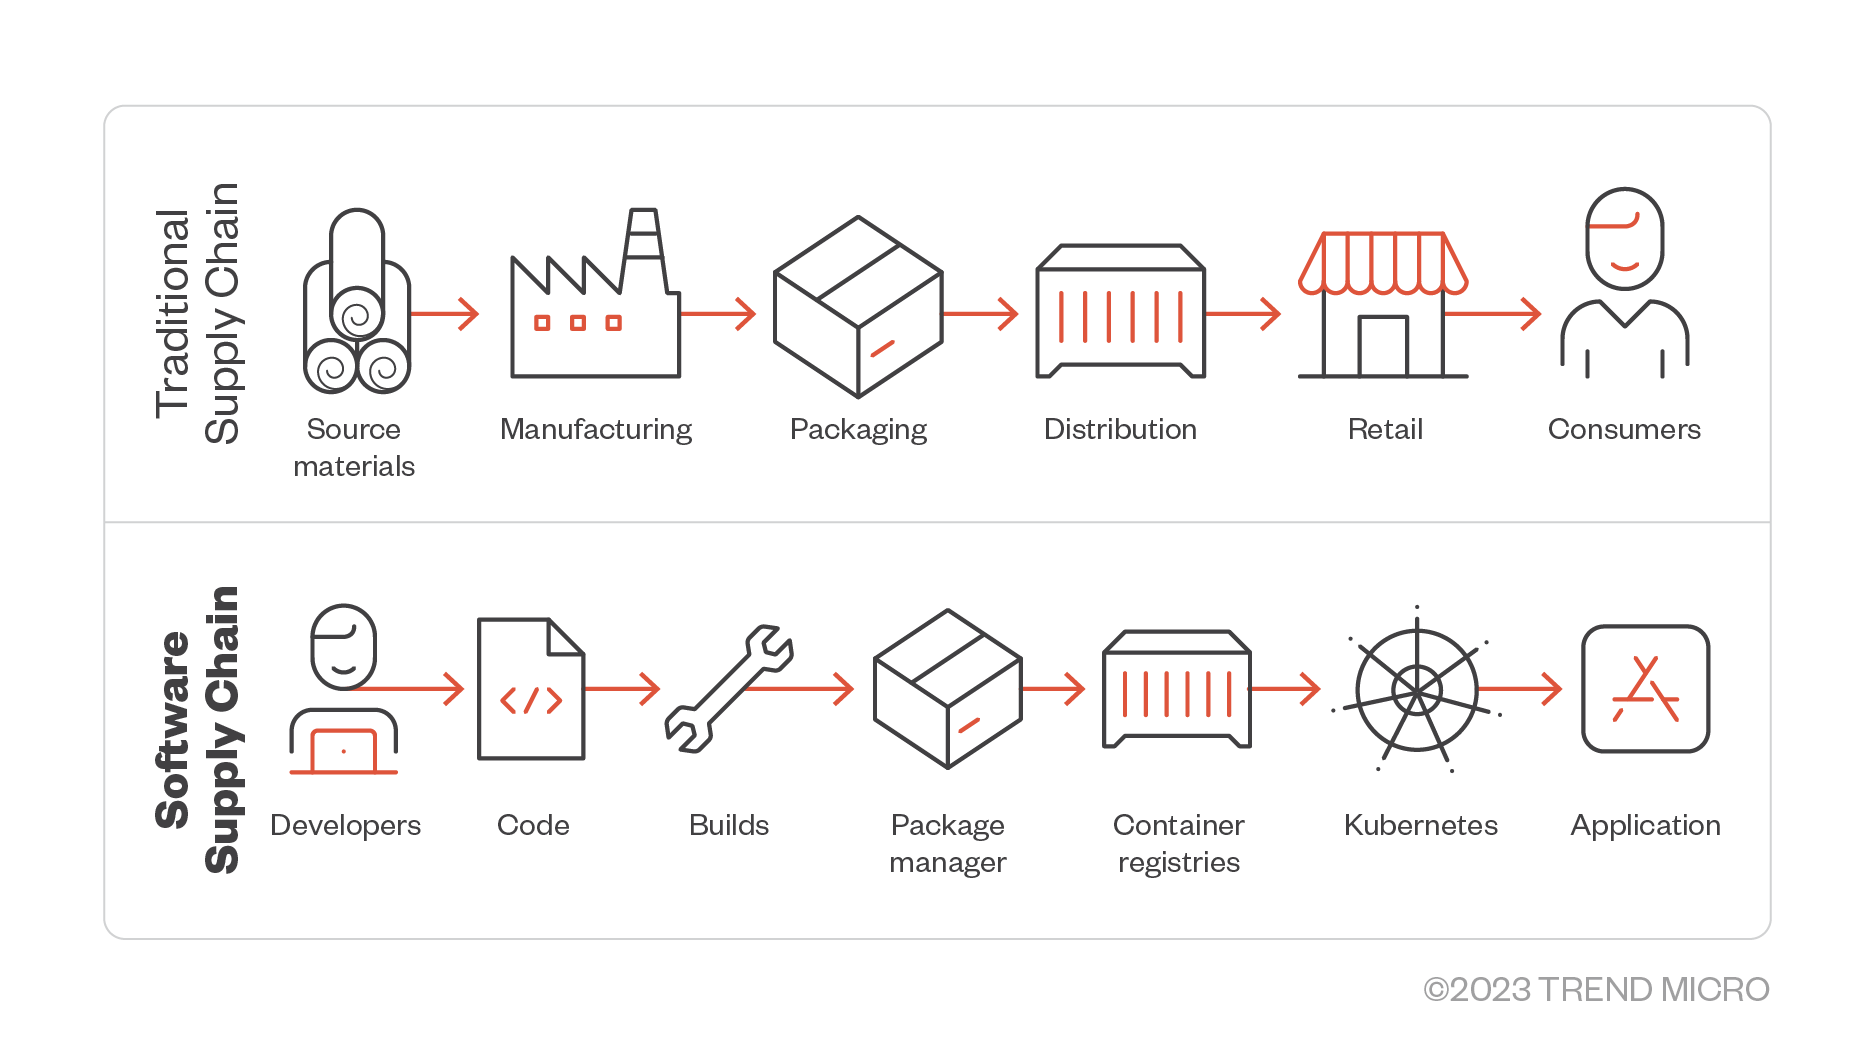 Figure 1. A diagram of a traditional supply chain alongside a software supply chain